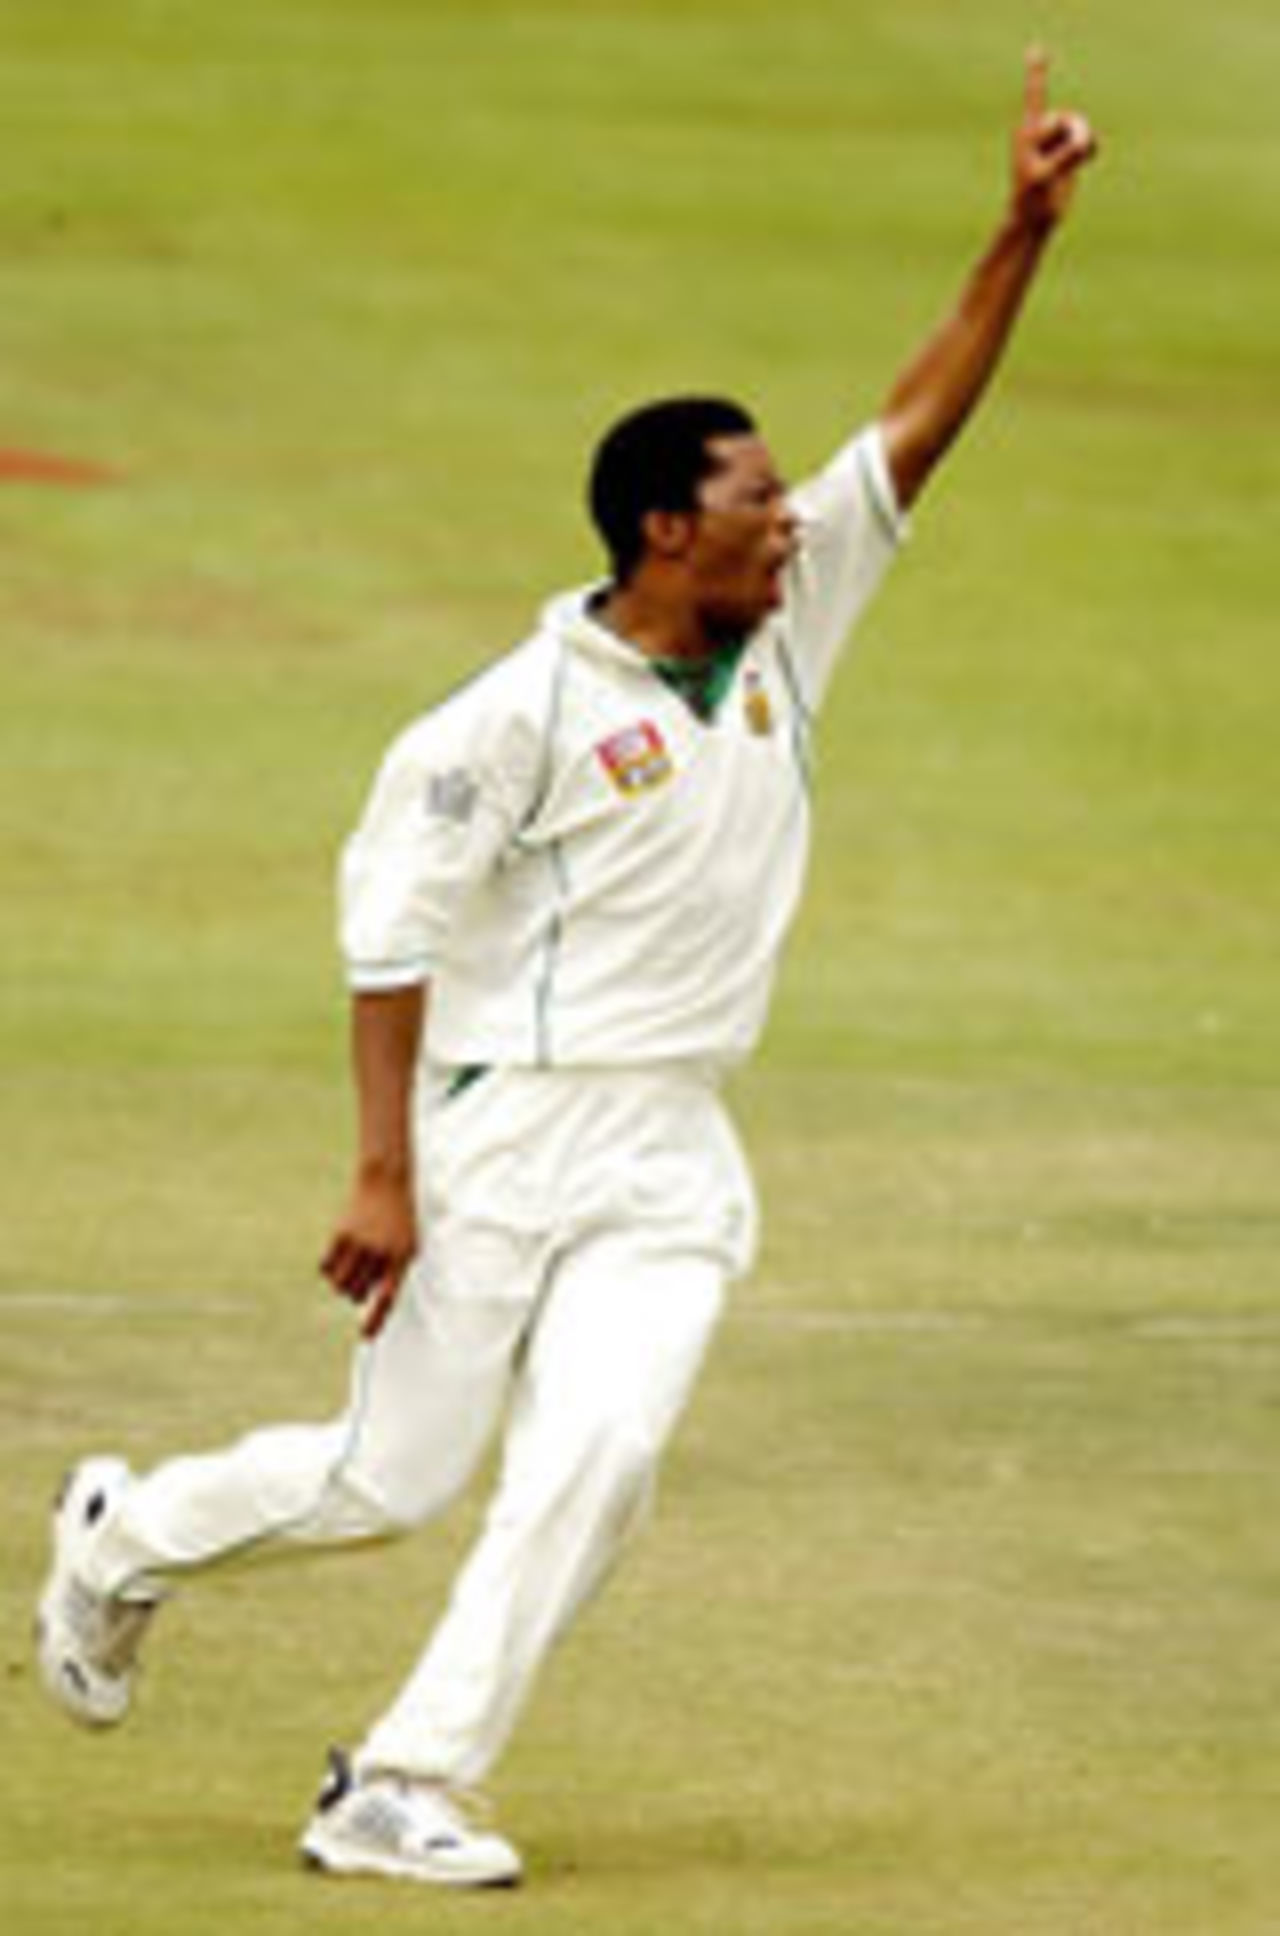 Makhaya Ntini celebrates a wicket, South Africa v West Indies, Cape Town, 3rd Test, January 6, 2003